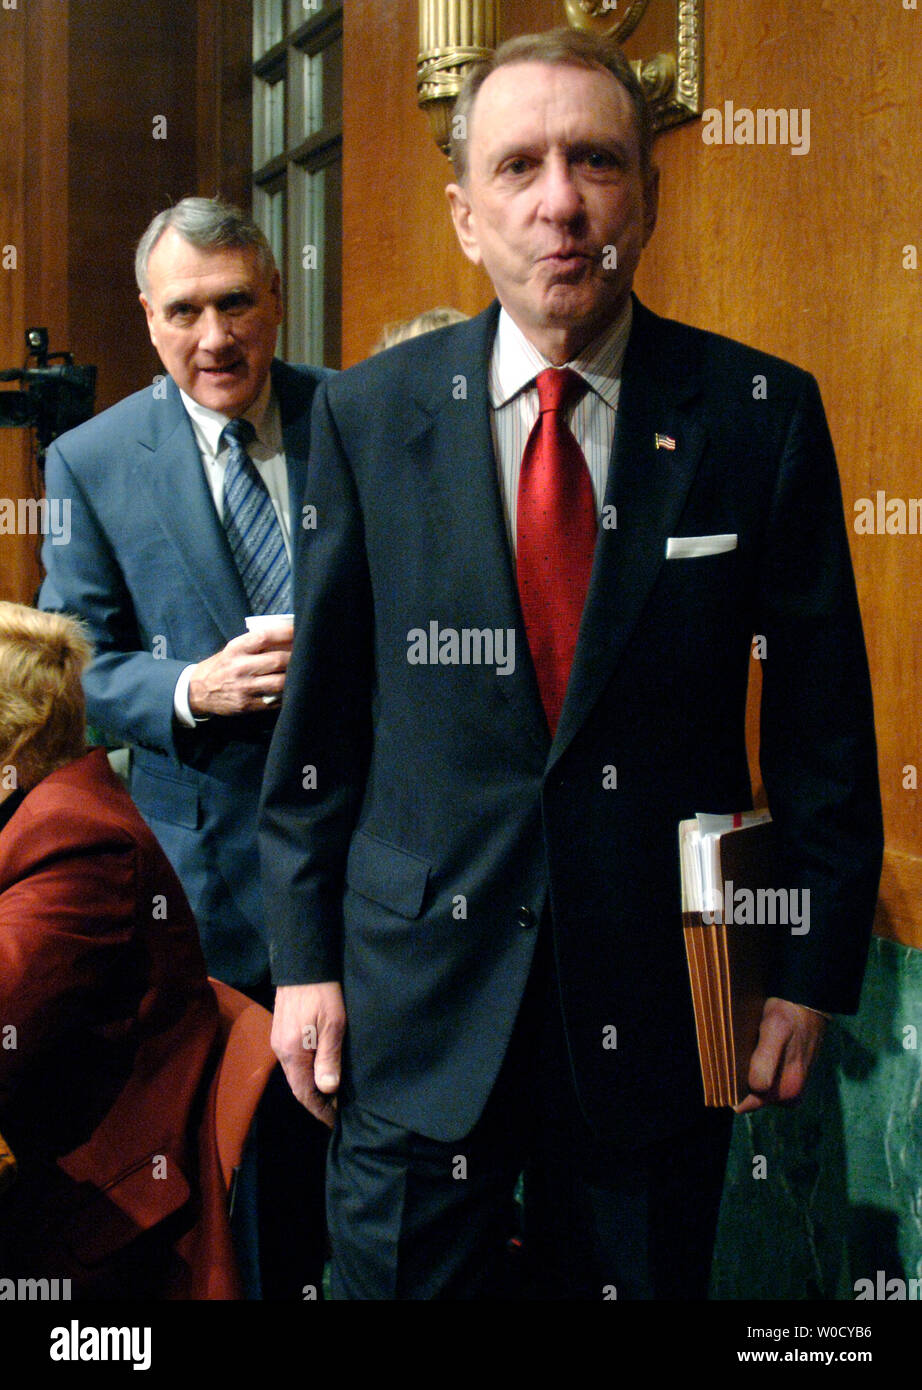 Chair of the Judiciary Committee Sen. Arlen Specter (R-Pa) followed by Sen. Charles Grasslley (R-IO) make their way to the Judicary Committee vote on the nomination of Samuel Alito to Justice of the Supreme Court, in Washington on January 24, 2006.  (UPI Photo/Kevin Dietsch) Stock Photo